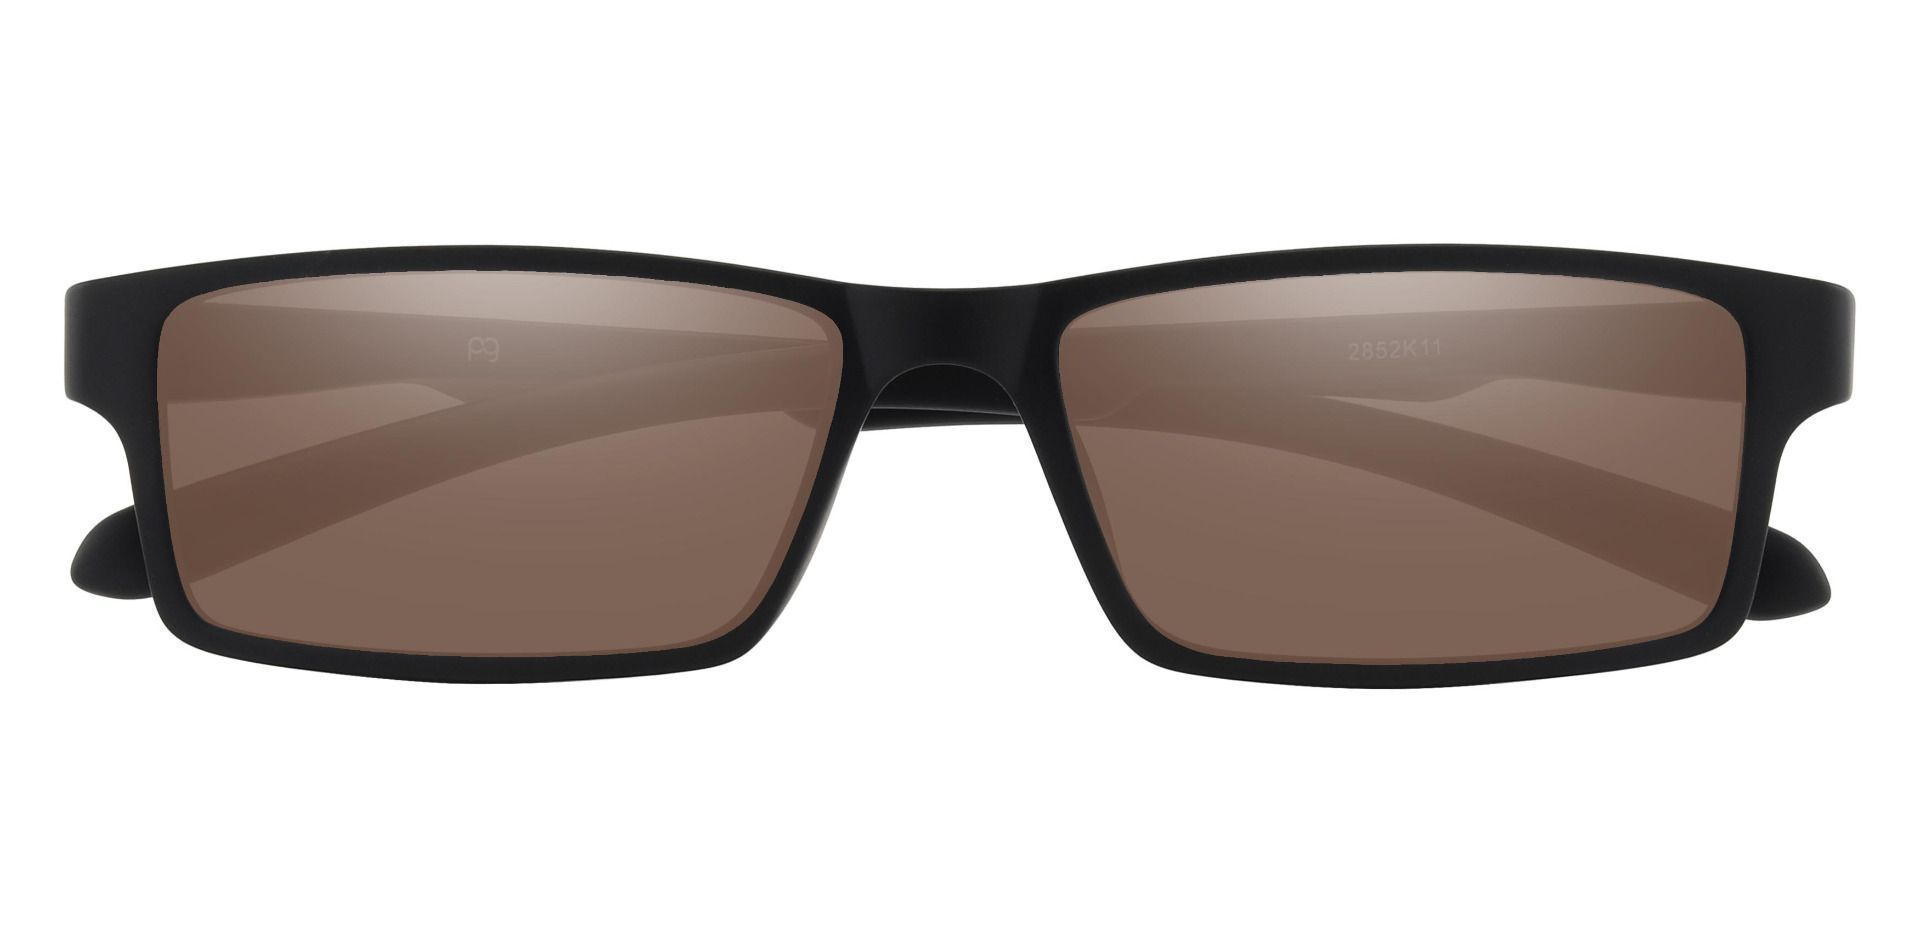 Walsh Rectangle Reading Sunglasses - Black Frame With Brown Lenses